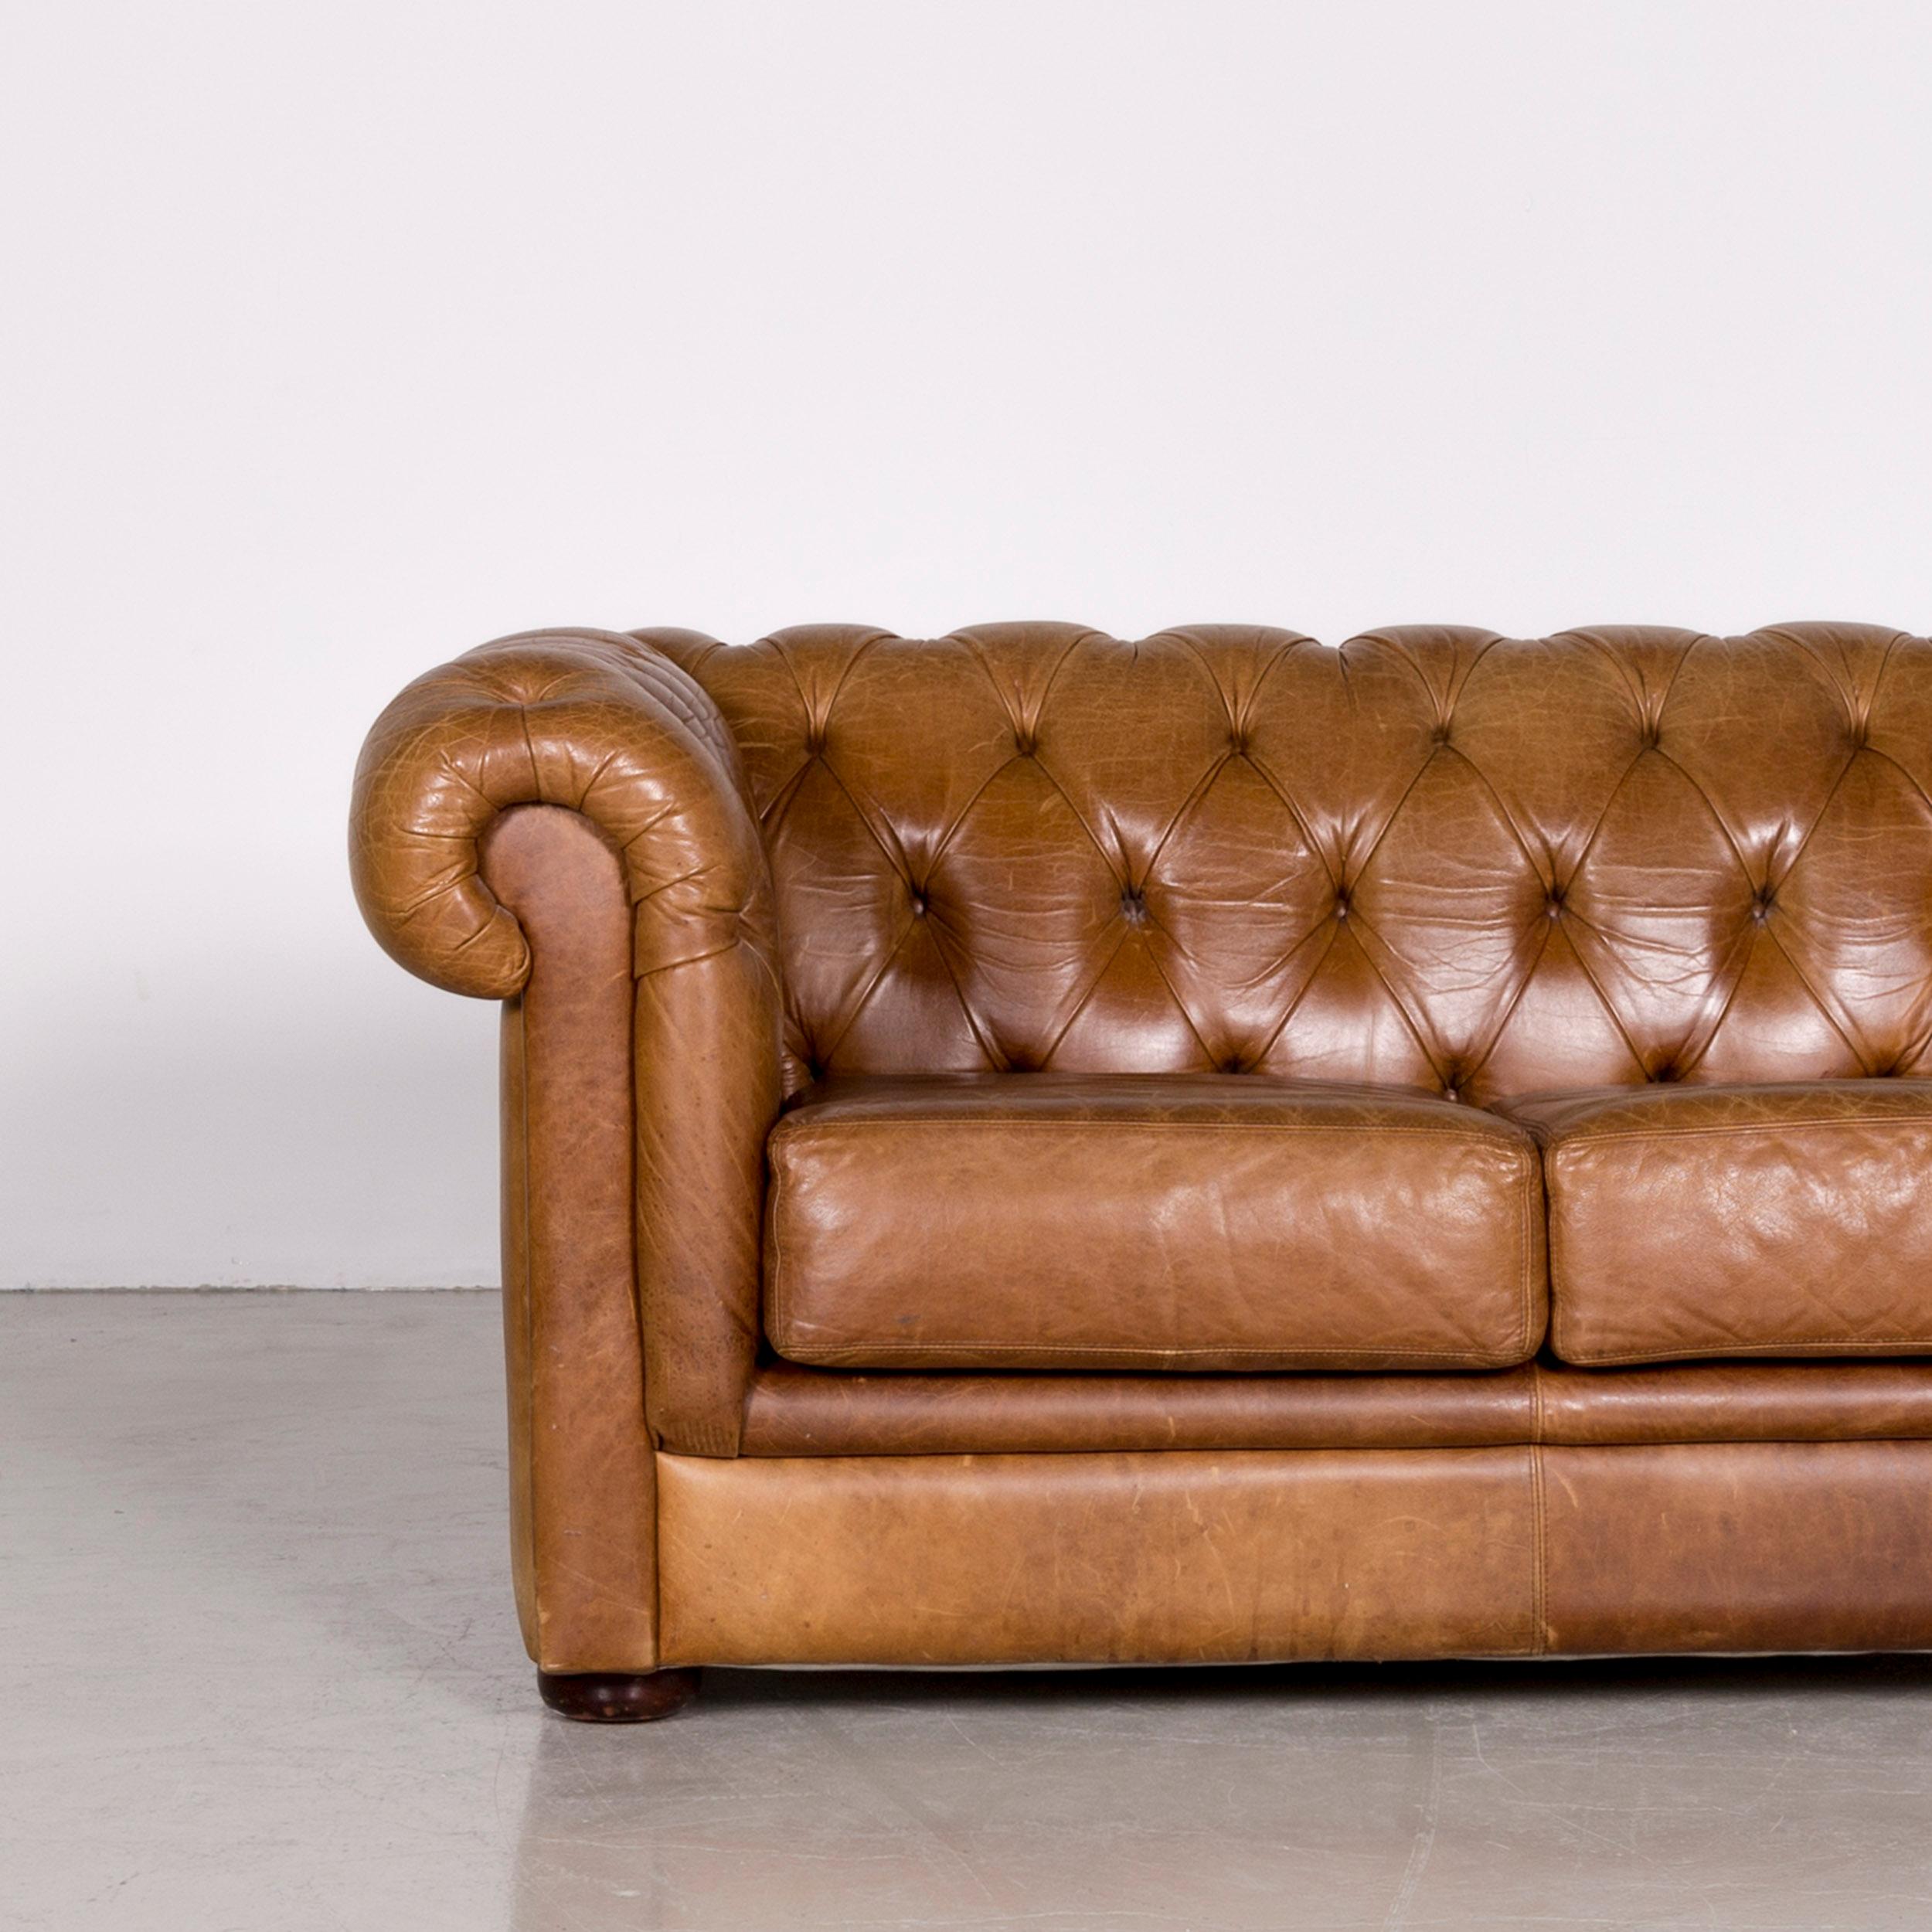 British Chesterfield Leather Sofa Brown Vintage Two-Seat Couch For Sale